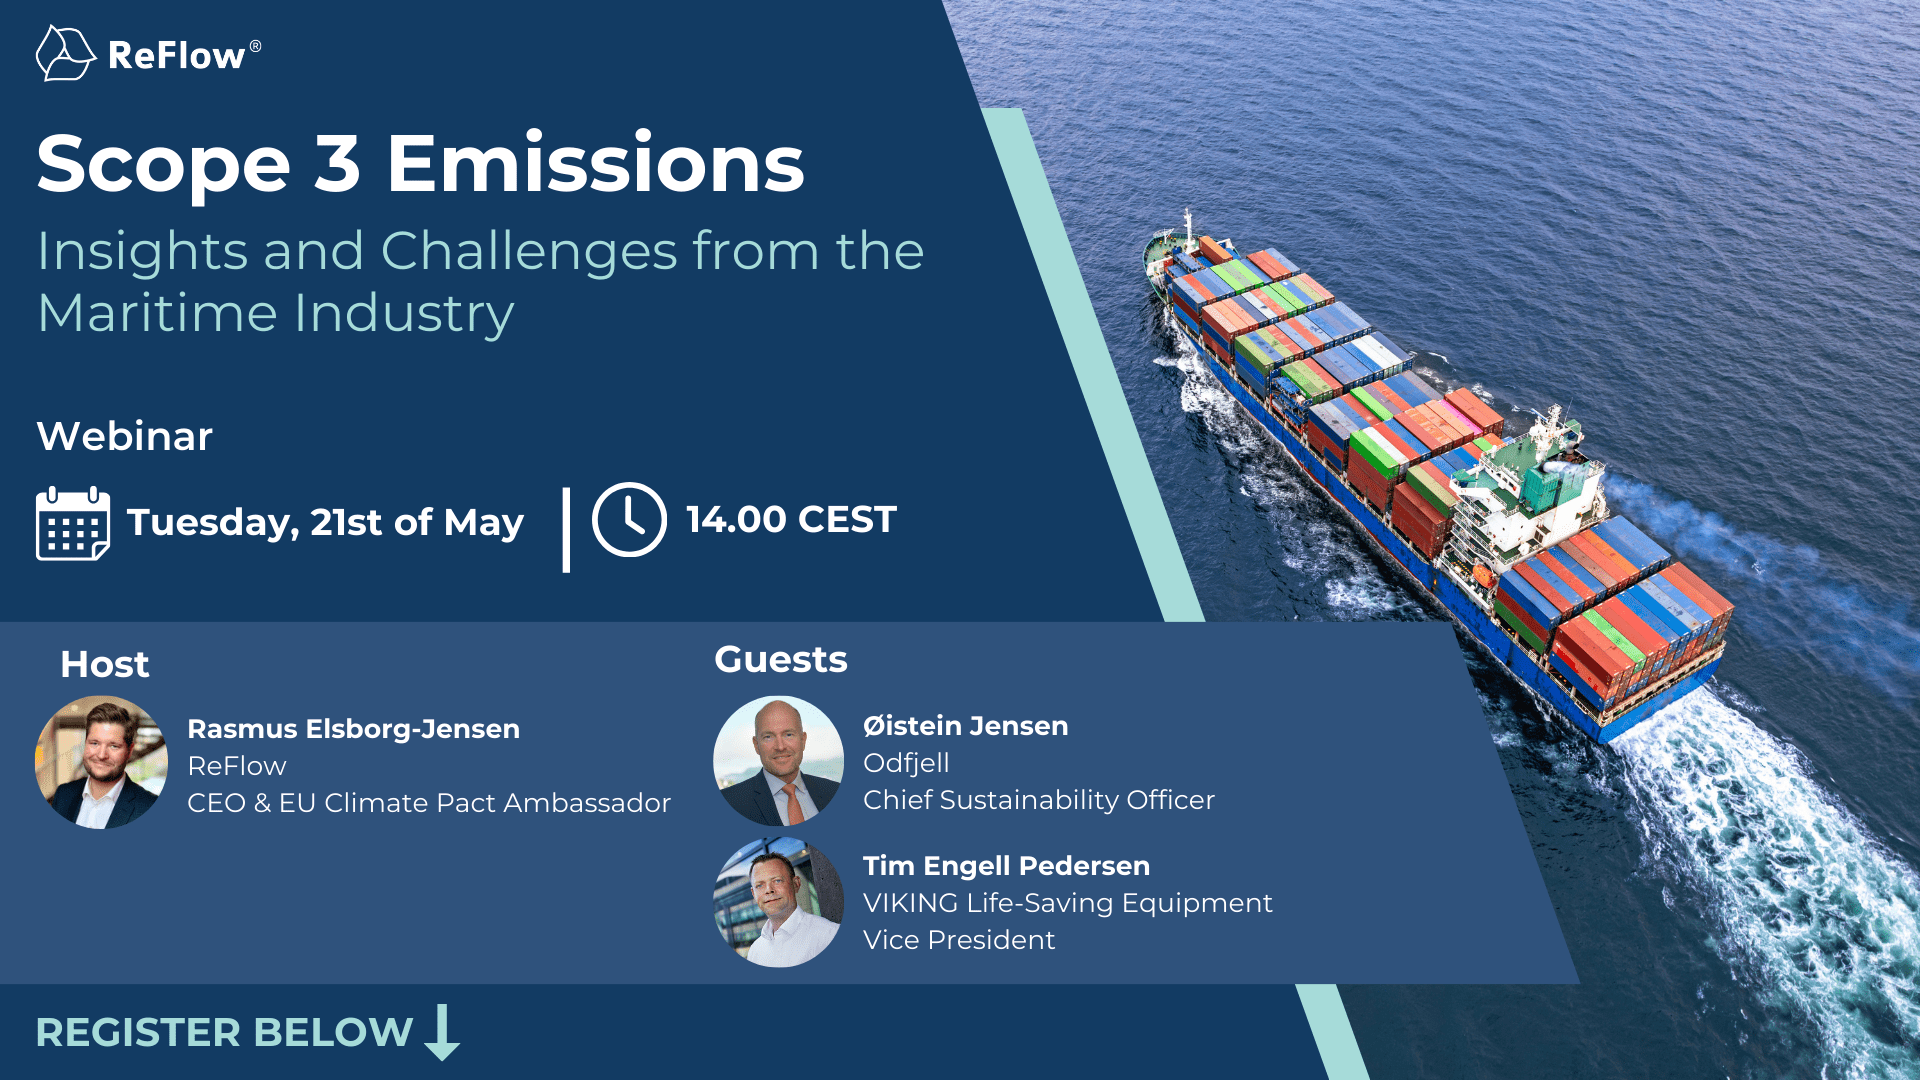 Scope 3 Emissions Webinar – Insights and Challenges from the Maritime Industry